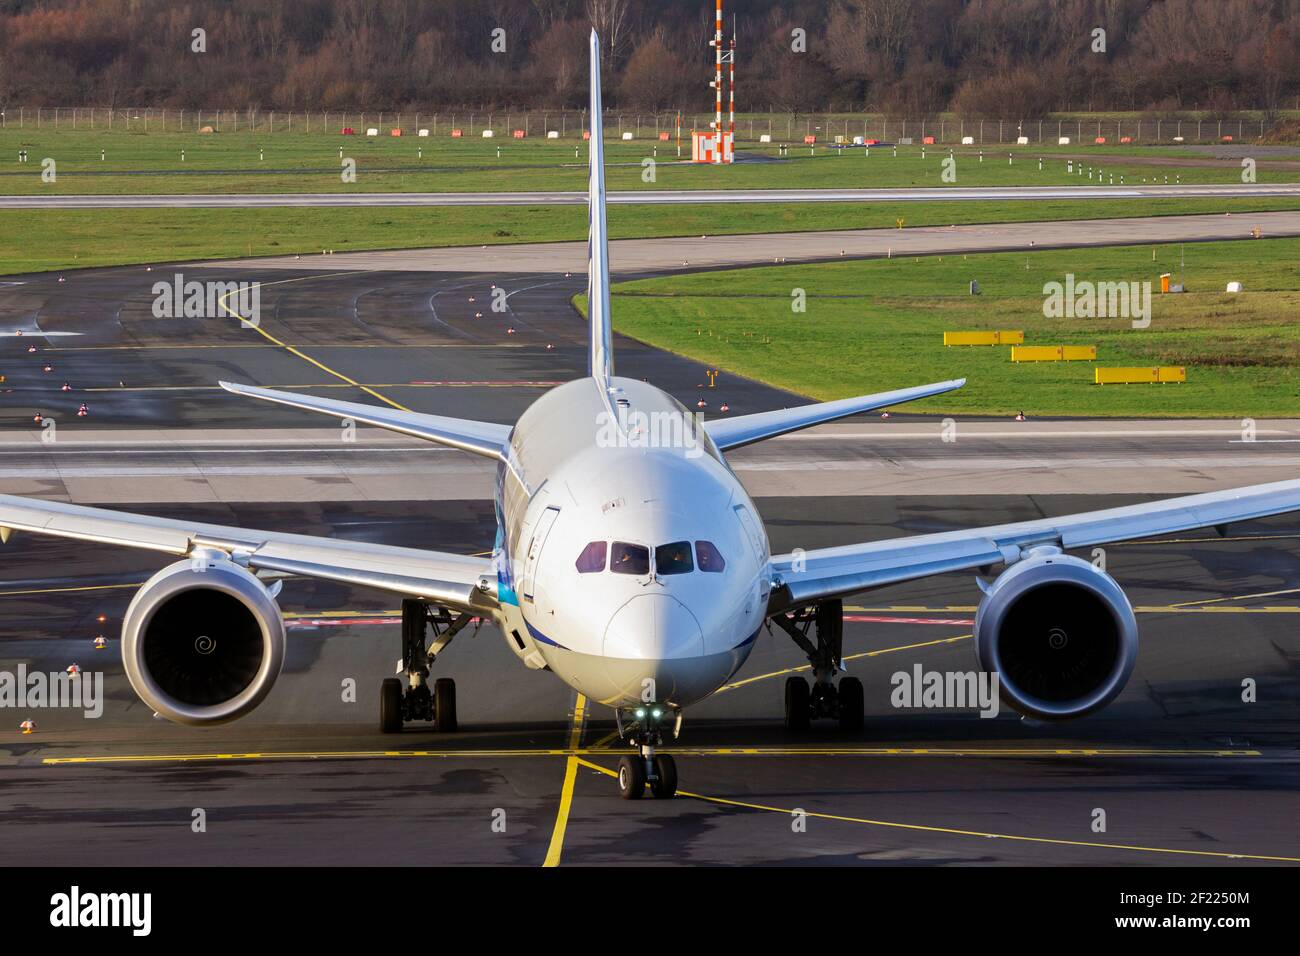 passenger plane arriving at an airport and taxiing to the terminal gate Stock Photo